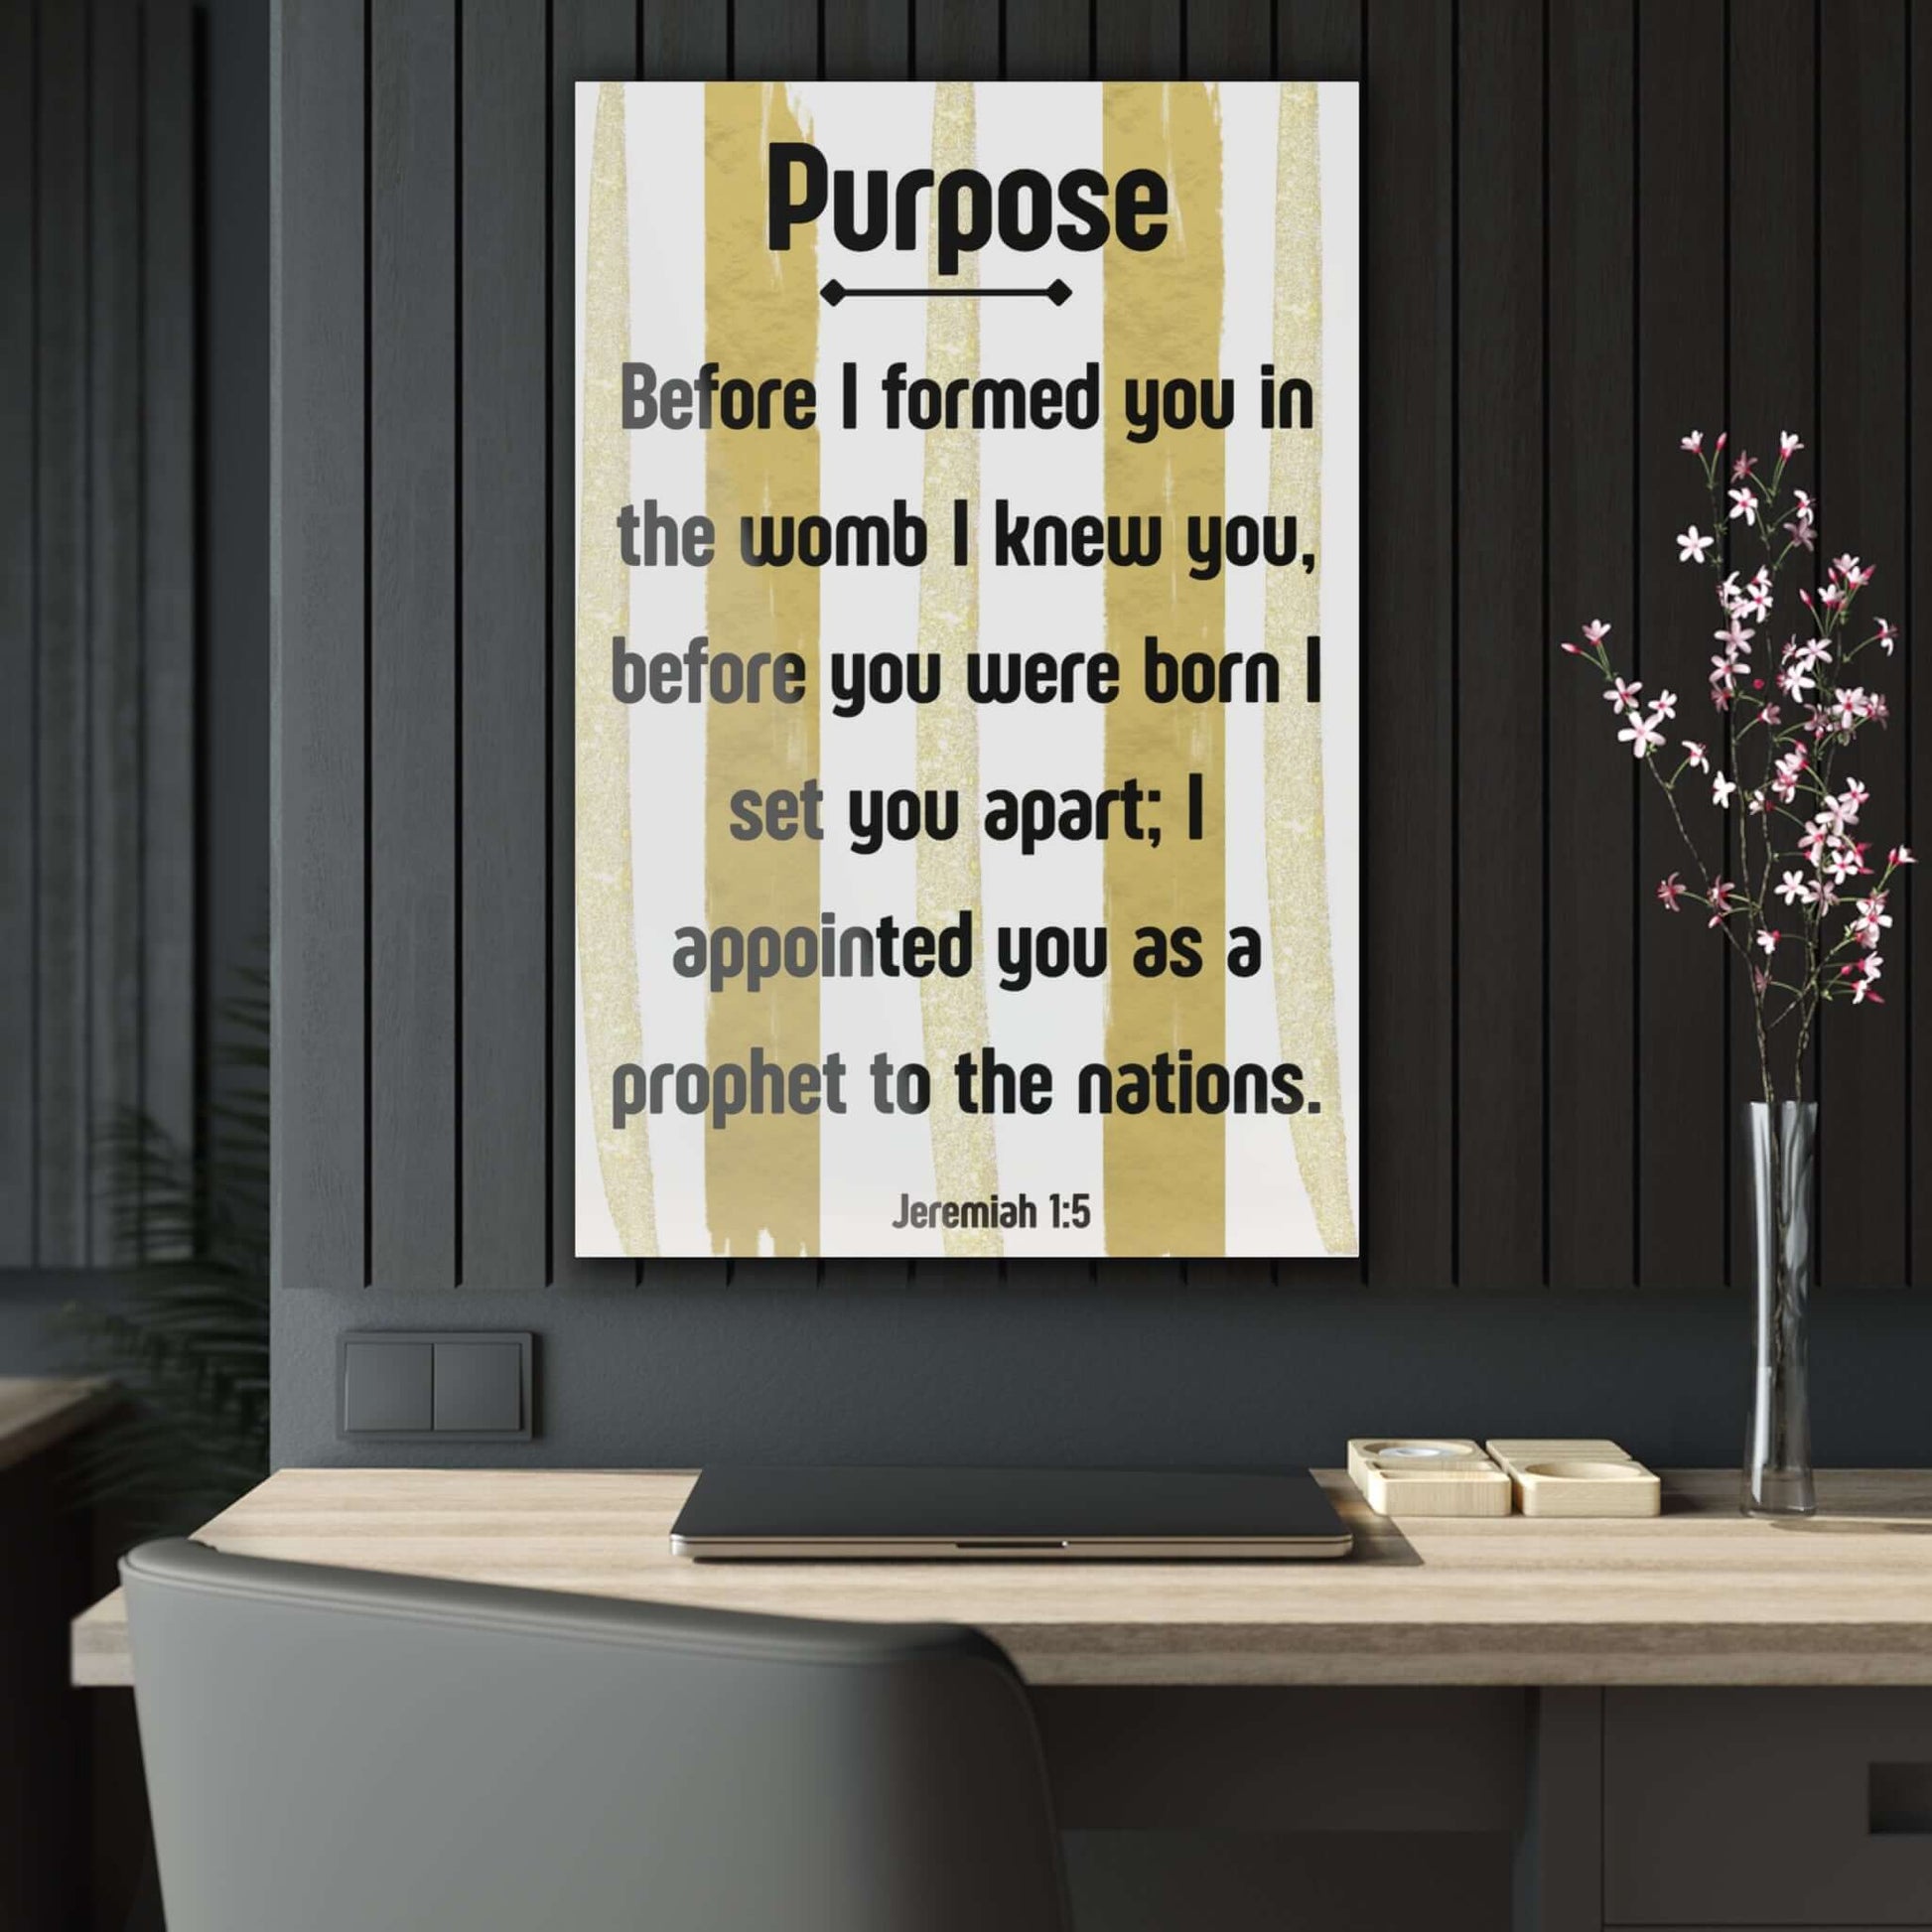 Tall Wall Art - Acrylic Print with Inspirational Scripture | Art & Wall Decor,Assembled in the USA,Assembled in USA,Decor,Home & Living,Home Decor,Indoor,Made in the USA,Made in USA,Poster